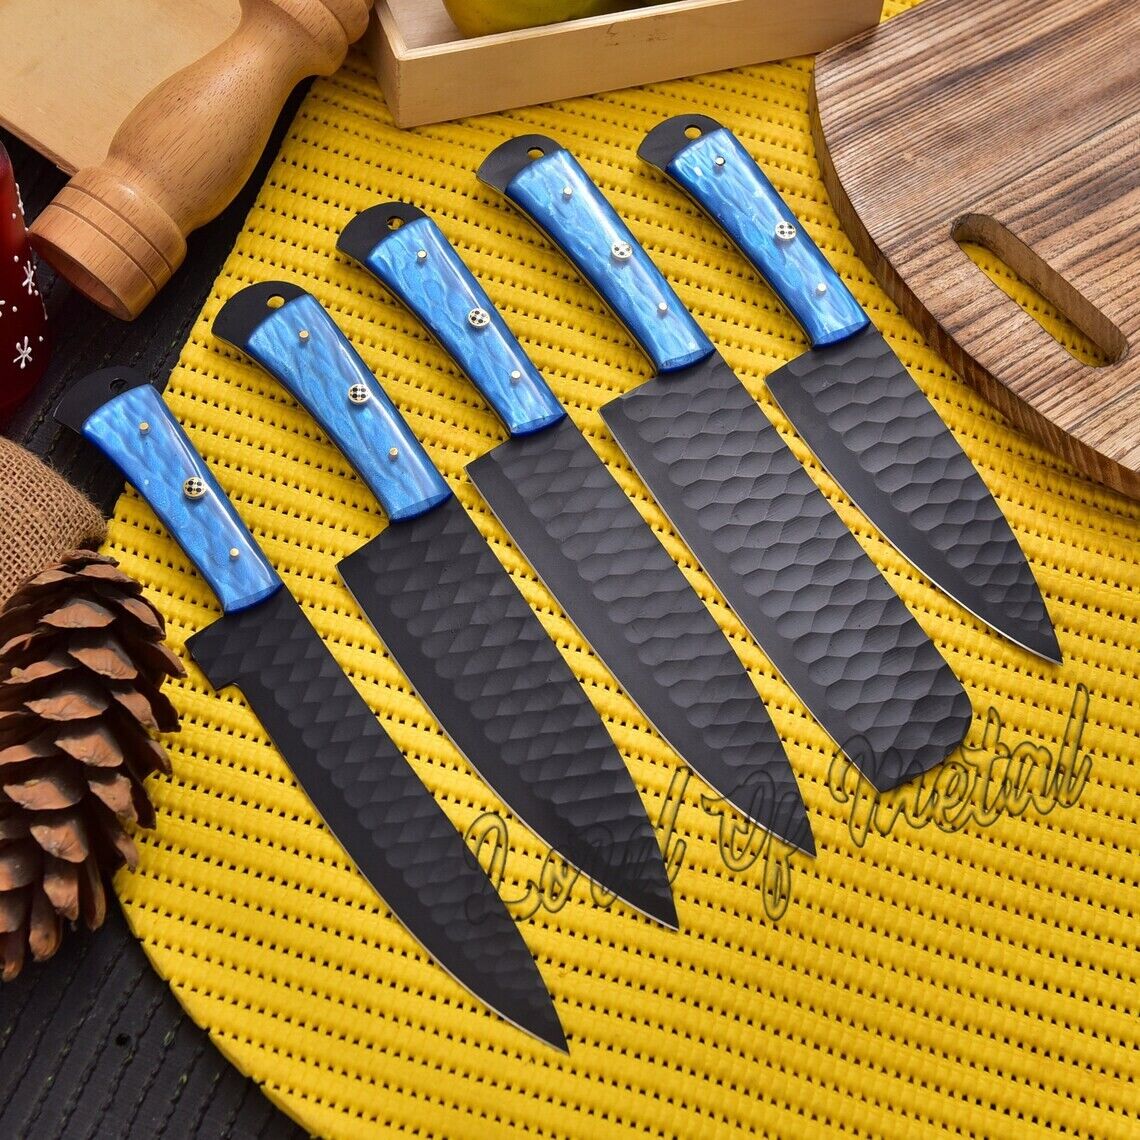 LOM CUSTOM D-2 STEEL HAND CRAFTED CHEF KITCHEN KNIVES SET OF 5 PIECES WITH CASE